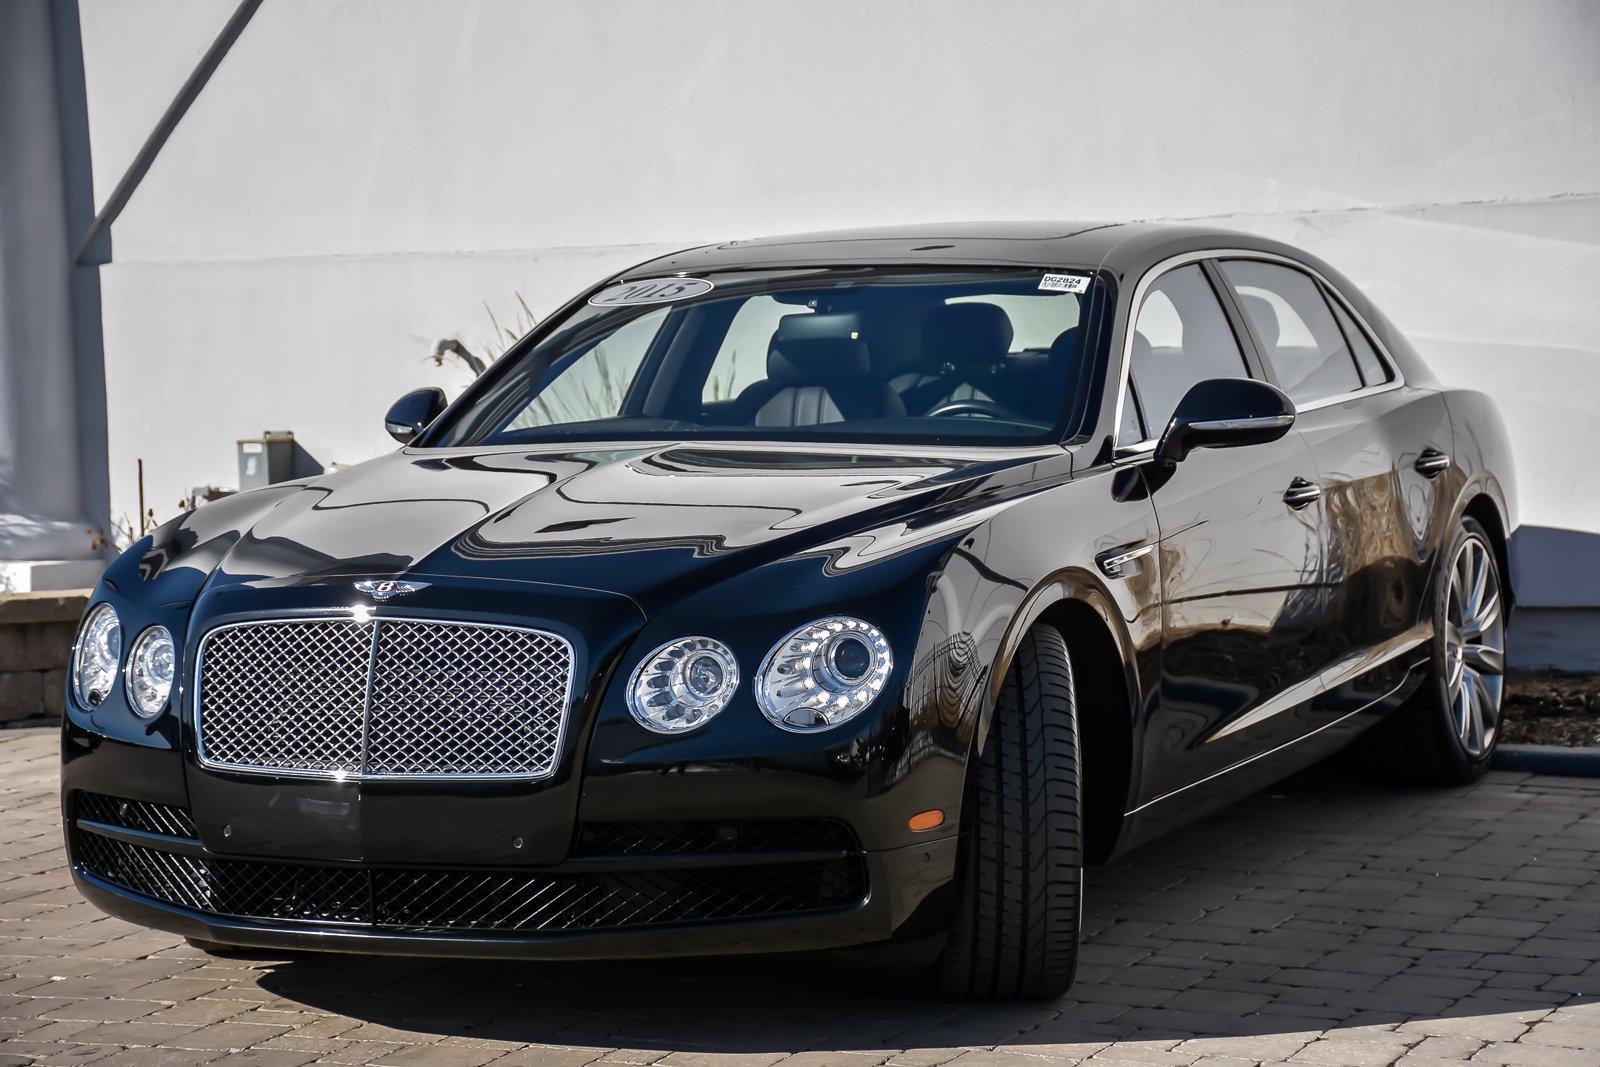 Used 2015 Bentley Flying Spur V8 | Downers Grove, IL